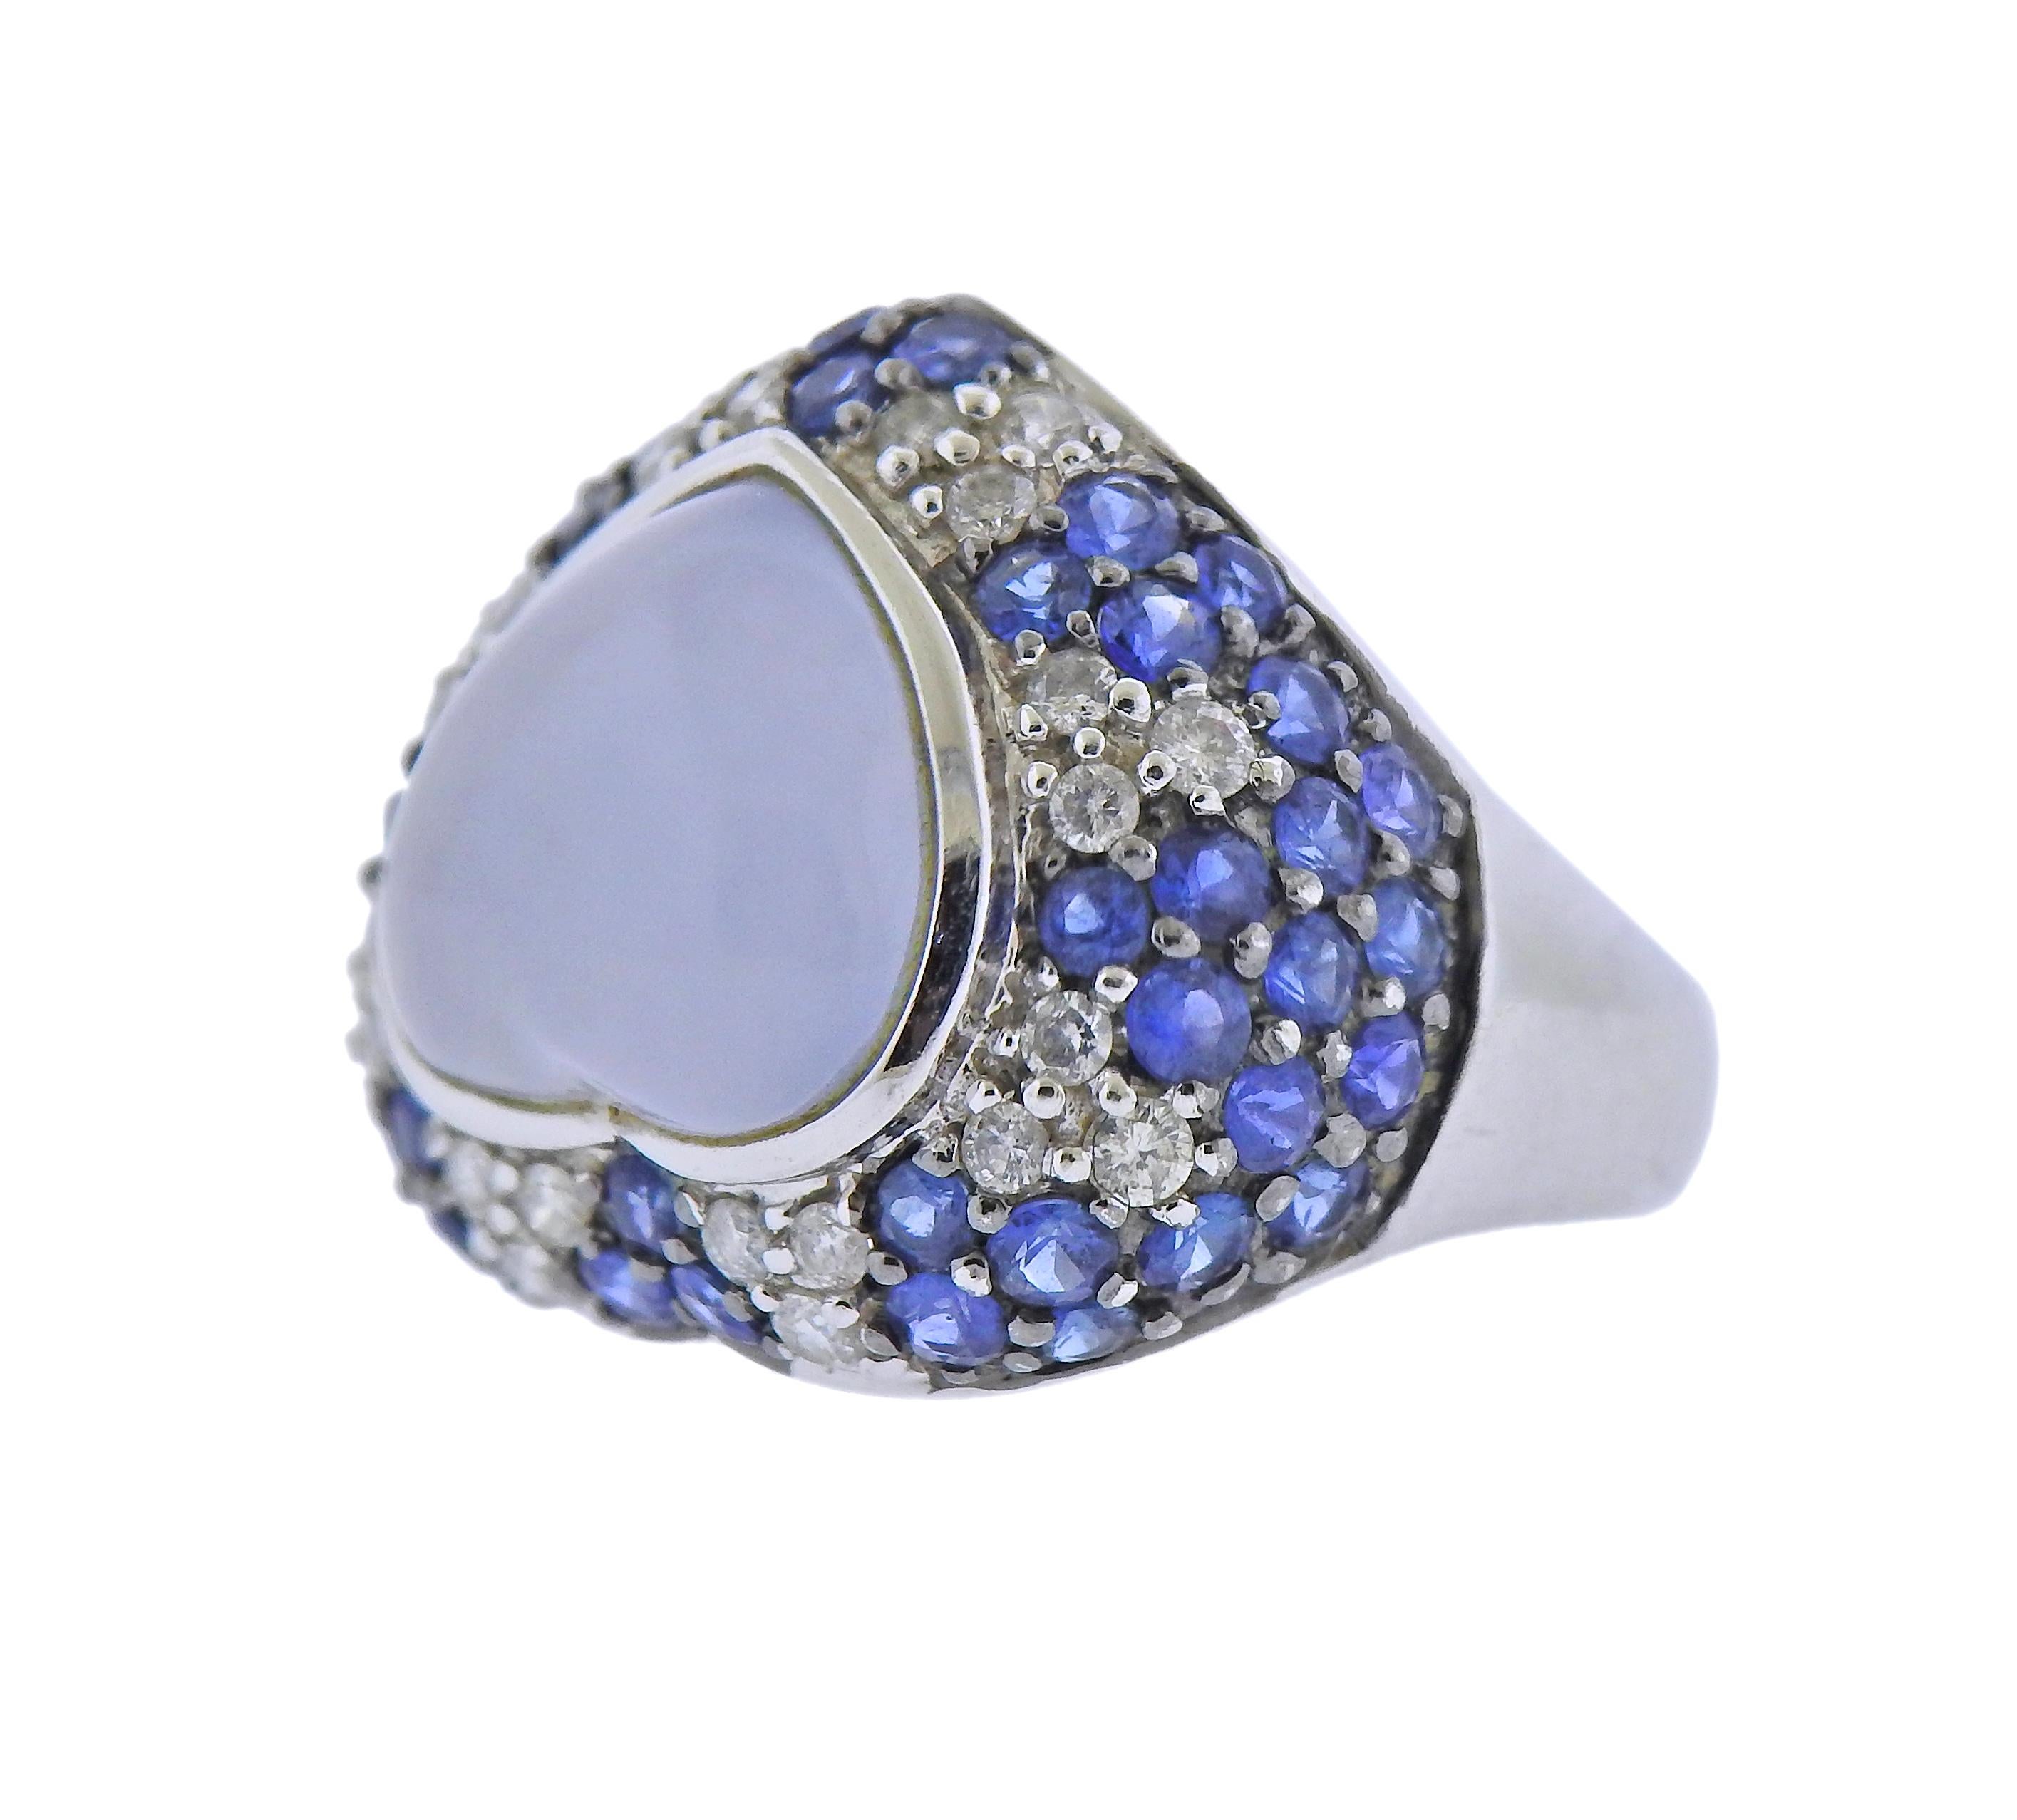 14k gold ring, set with heart shaped chalcedony, surrounded with blue sapphires and approx. 0.24ctw in diamonds. Ring size - 3.25, ring top - 18mm x 22mm. Marked: 14k 585. Weight - 7.2 grams.